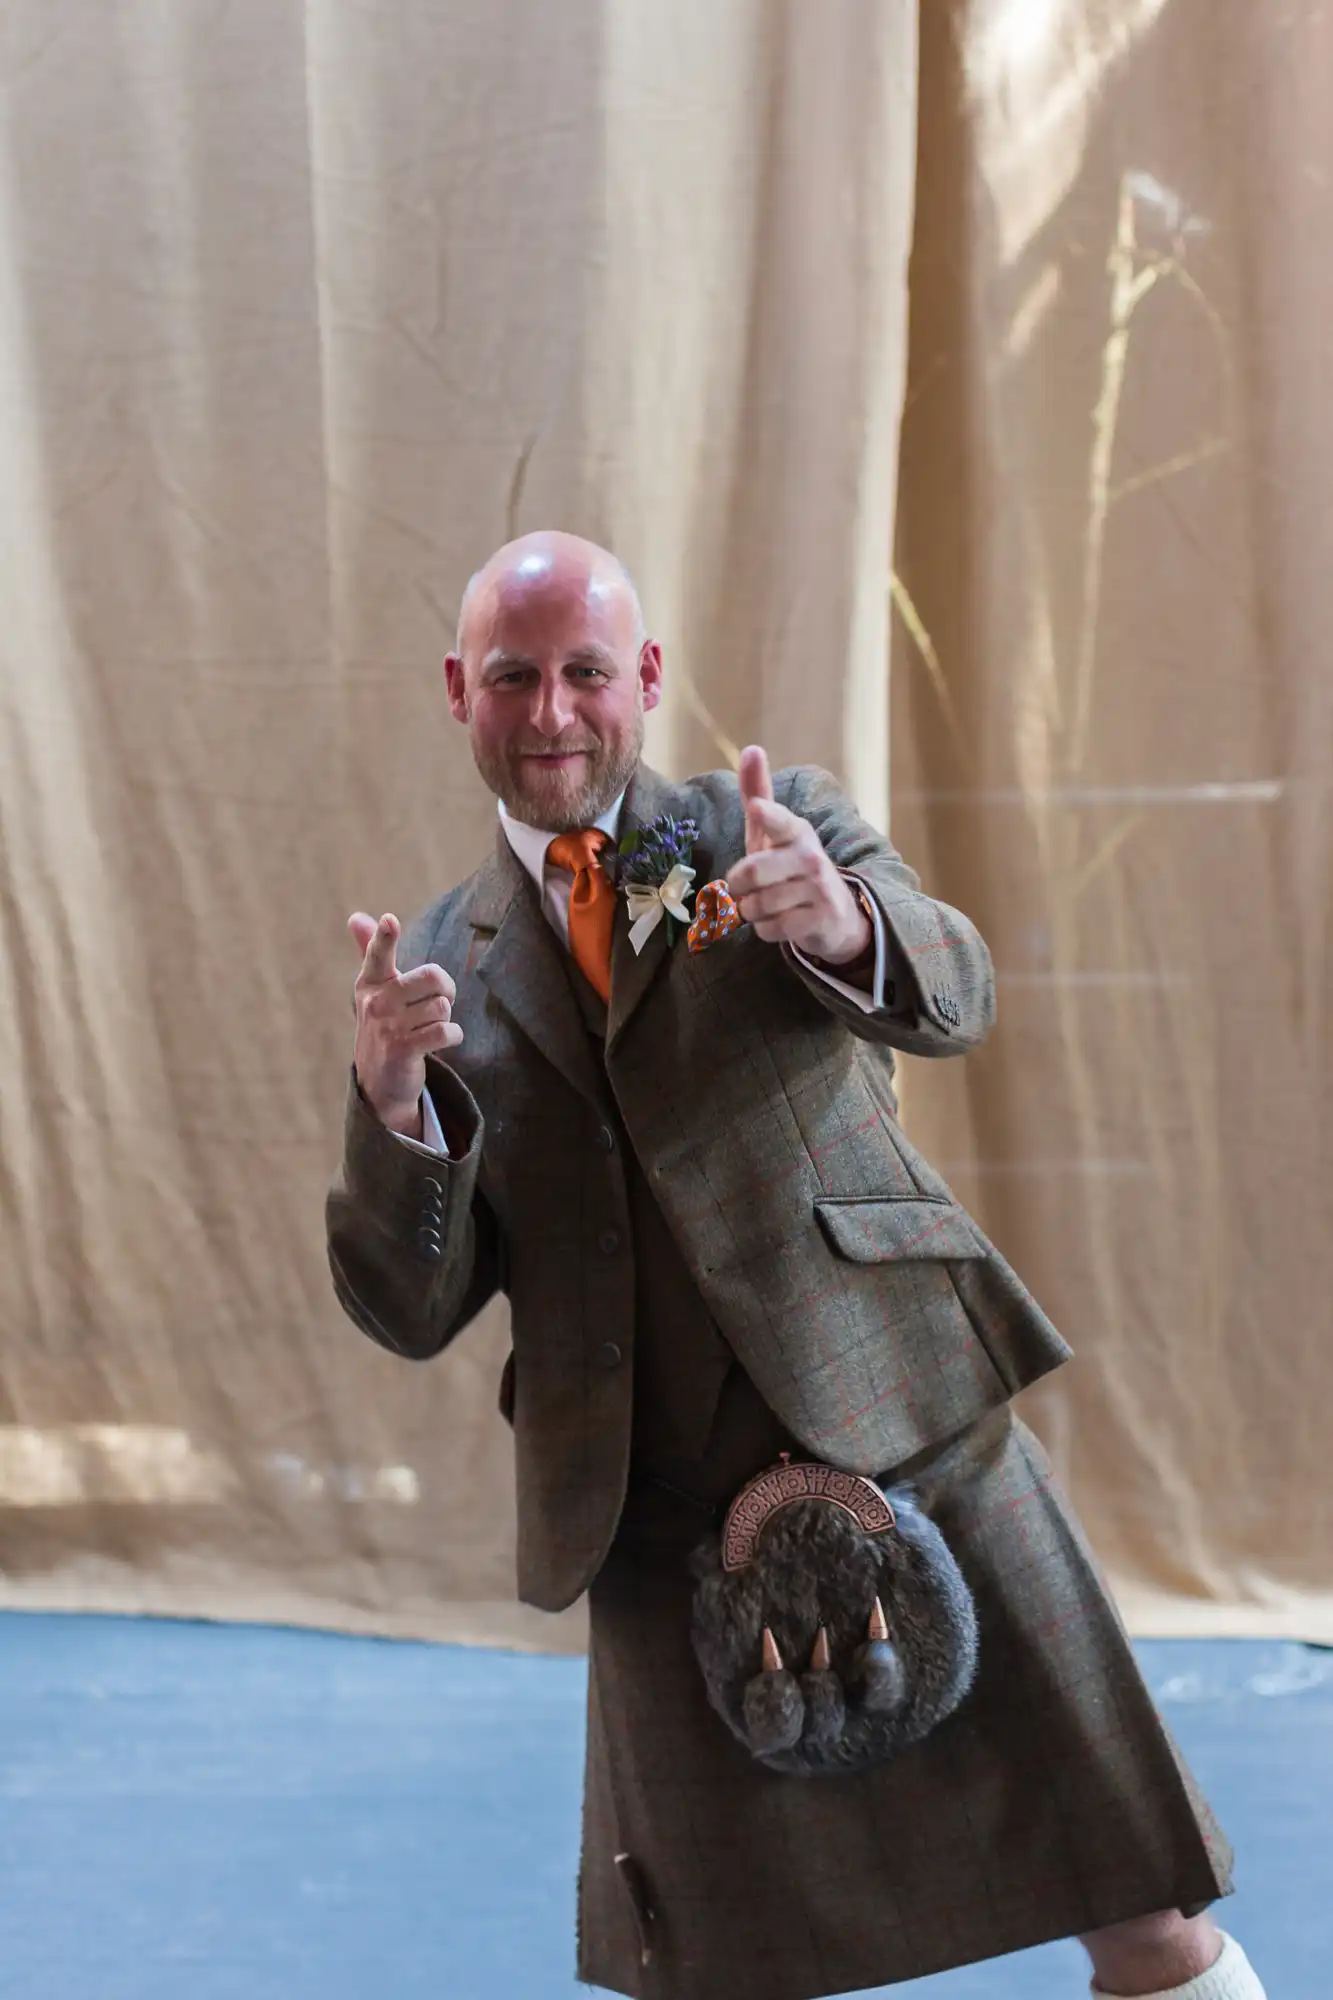 A bald man in a tweed suit and kilt, smiling and gesturing thumb's up with both hands, stands in front of a beige curtain.